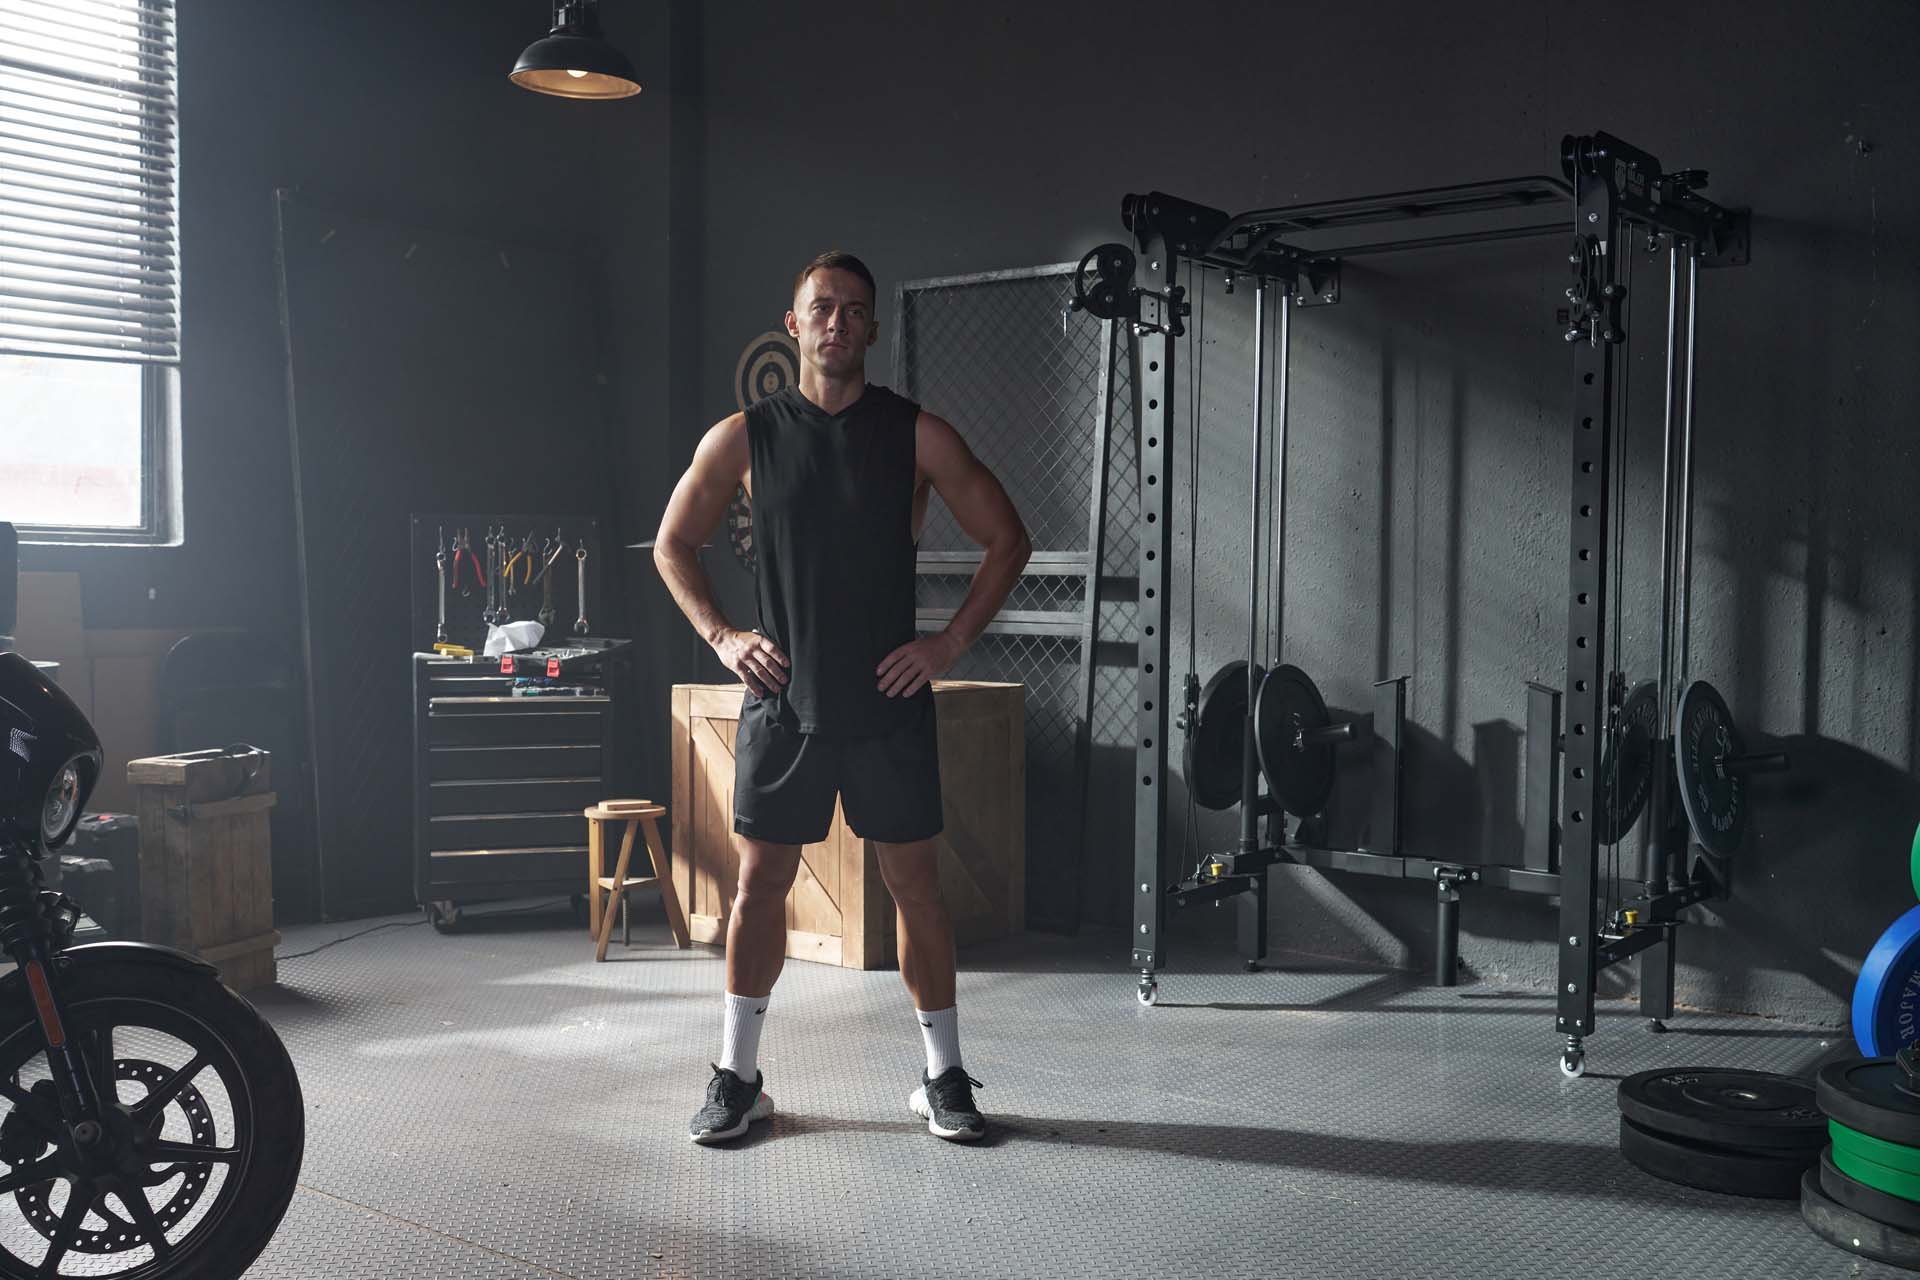 A man stands in a well-equipped home garage gym